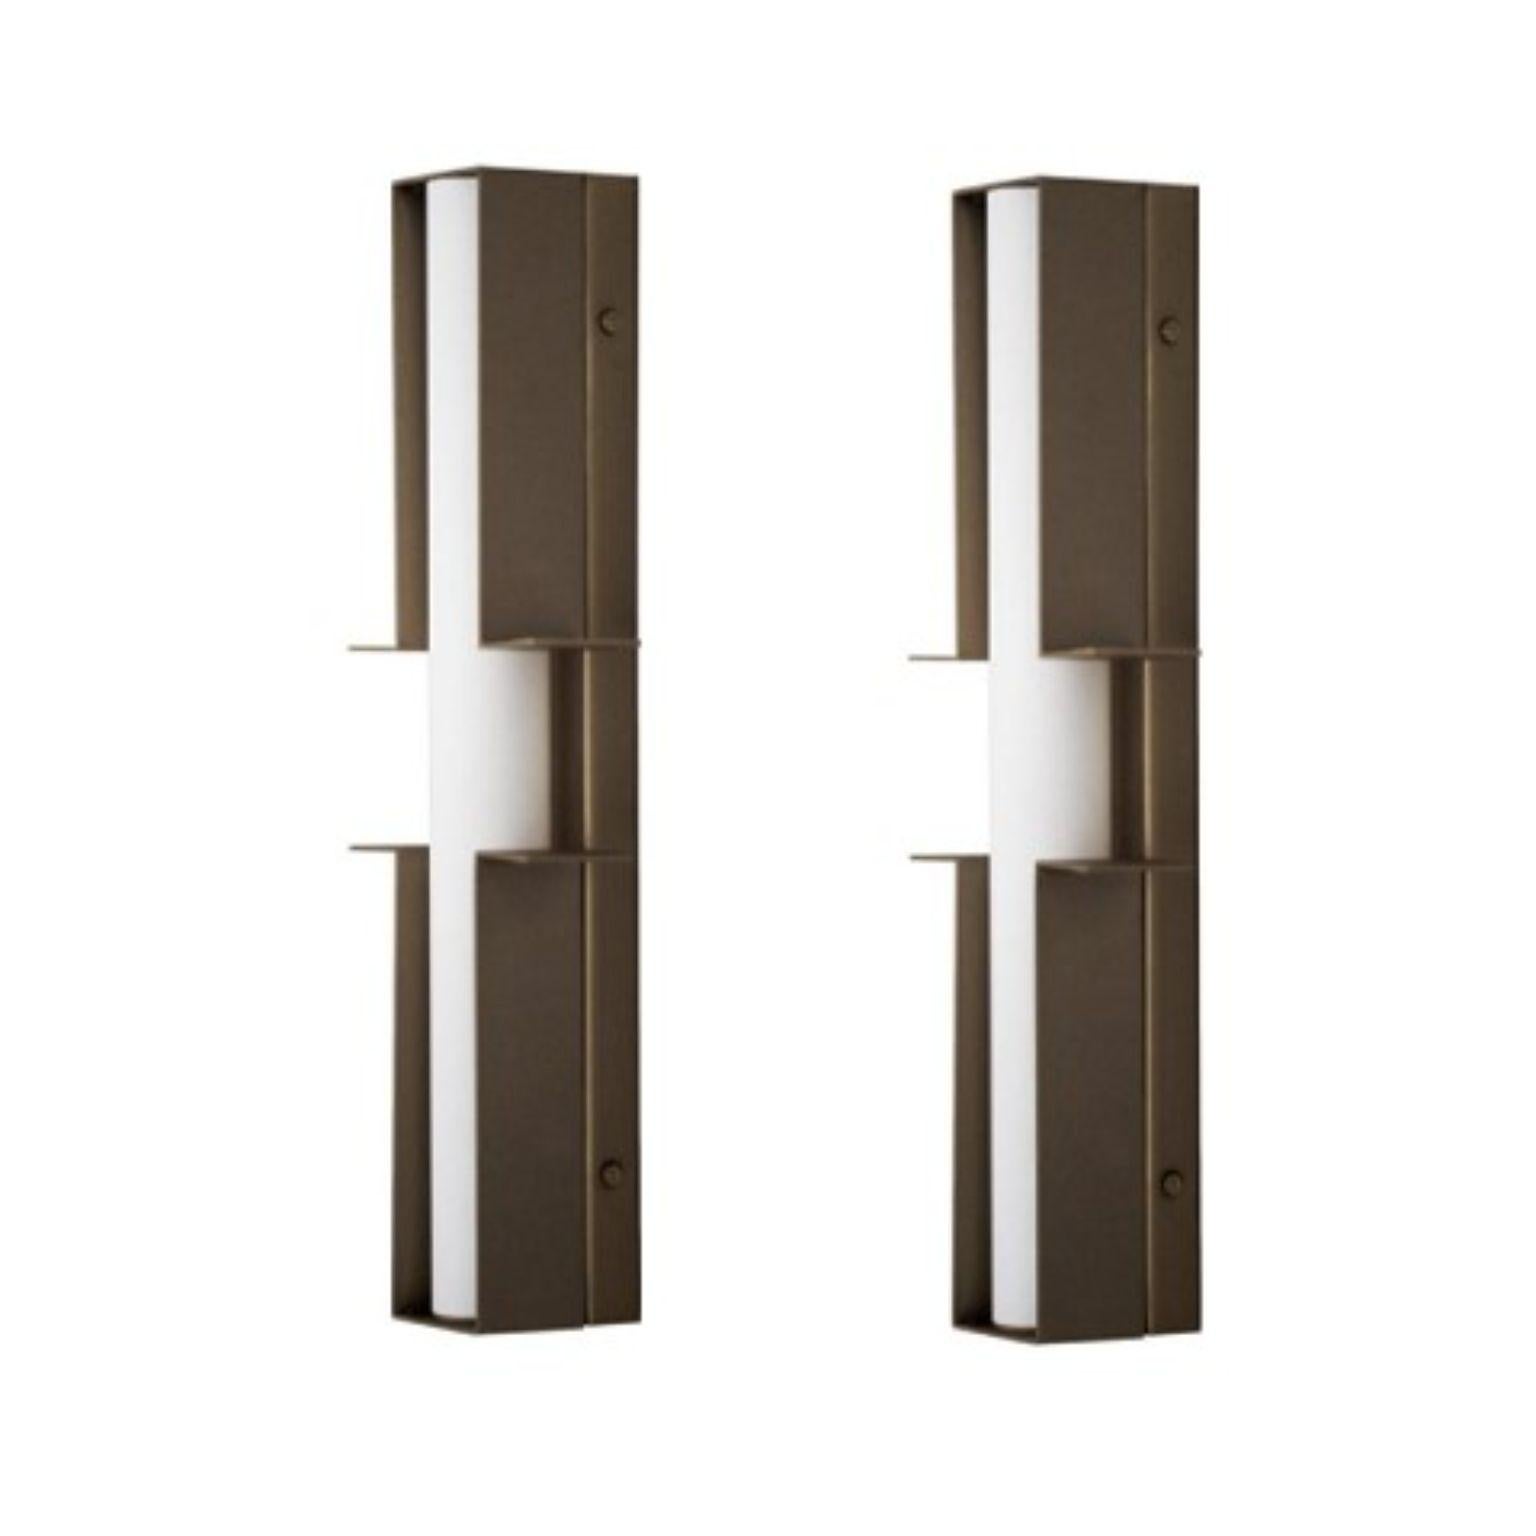 Set of 2 bronze junction wall lights by Square in Circle
Dimensions: W 12,5 x H 38 x D 6 cm
Materials: Dark bronze, white frosted glass tube 

A dark bronze wall light crafted from two parts. Each part extends to the sides, creating a minimalist